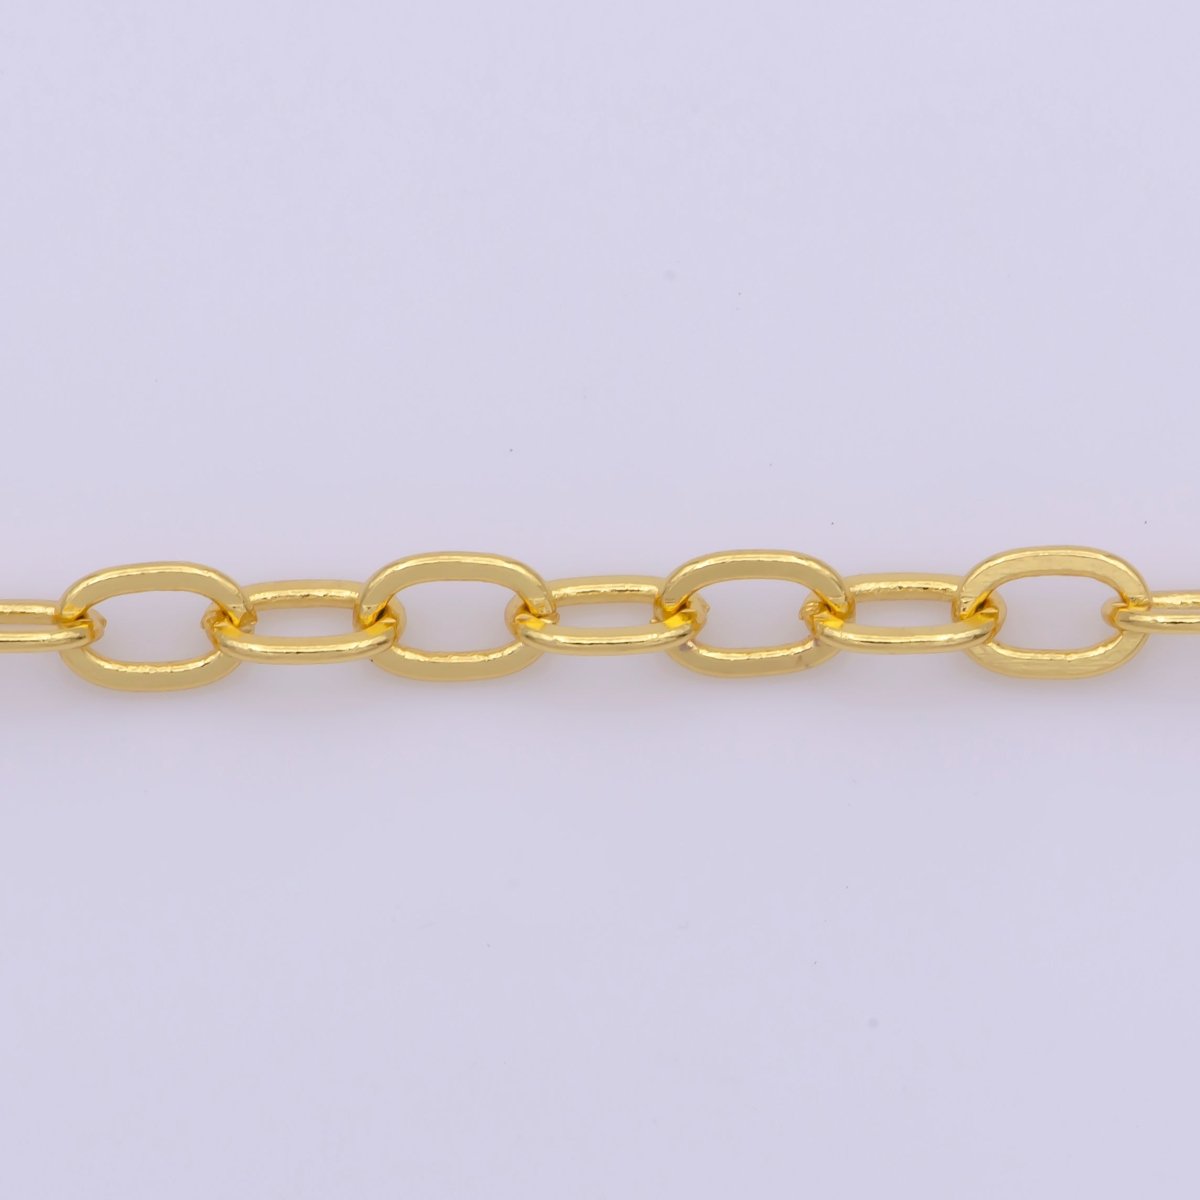 24K Gold Filled 4mm Cable 20 Inch Statement Chain Necklace w. Extender | WA-293 Clearance Pricing - DLUXCA